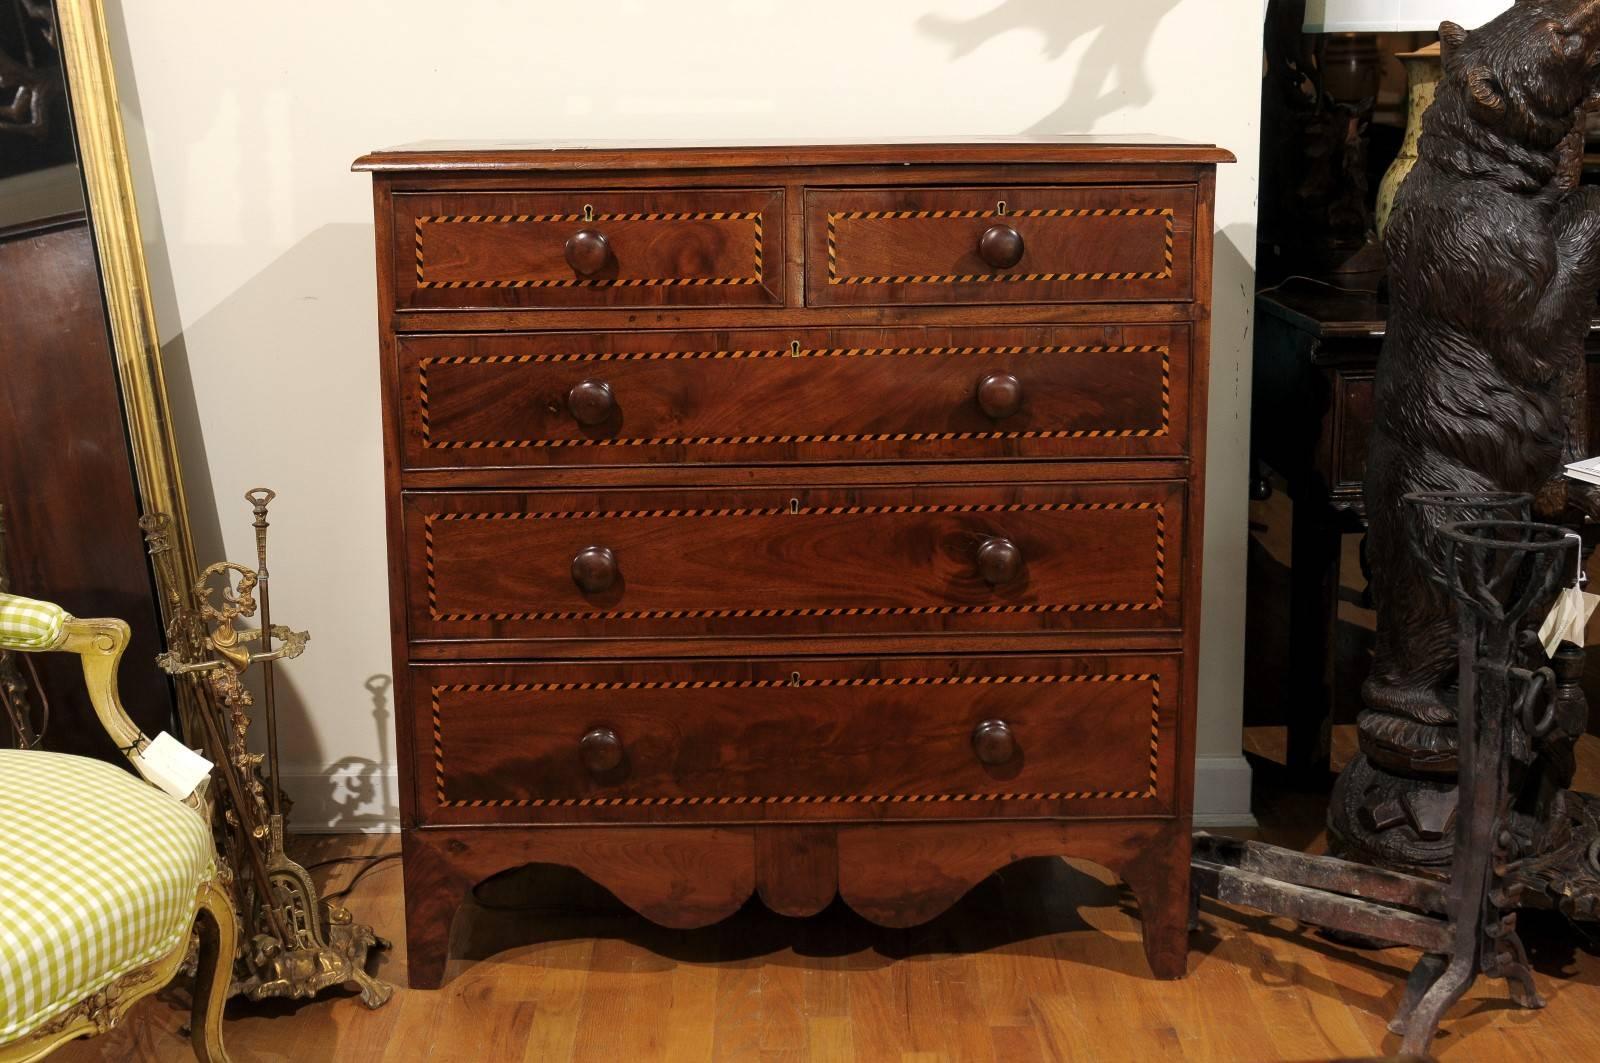 This beautiful, Classic English chest is made of mahogany. Each drawer on the chest has a patterned inlay with wooden knobs.